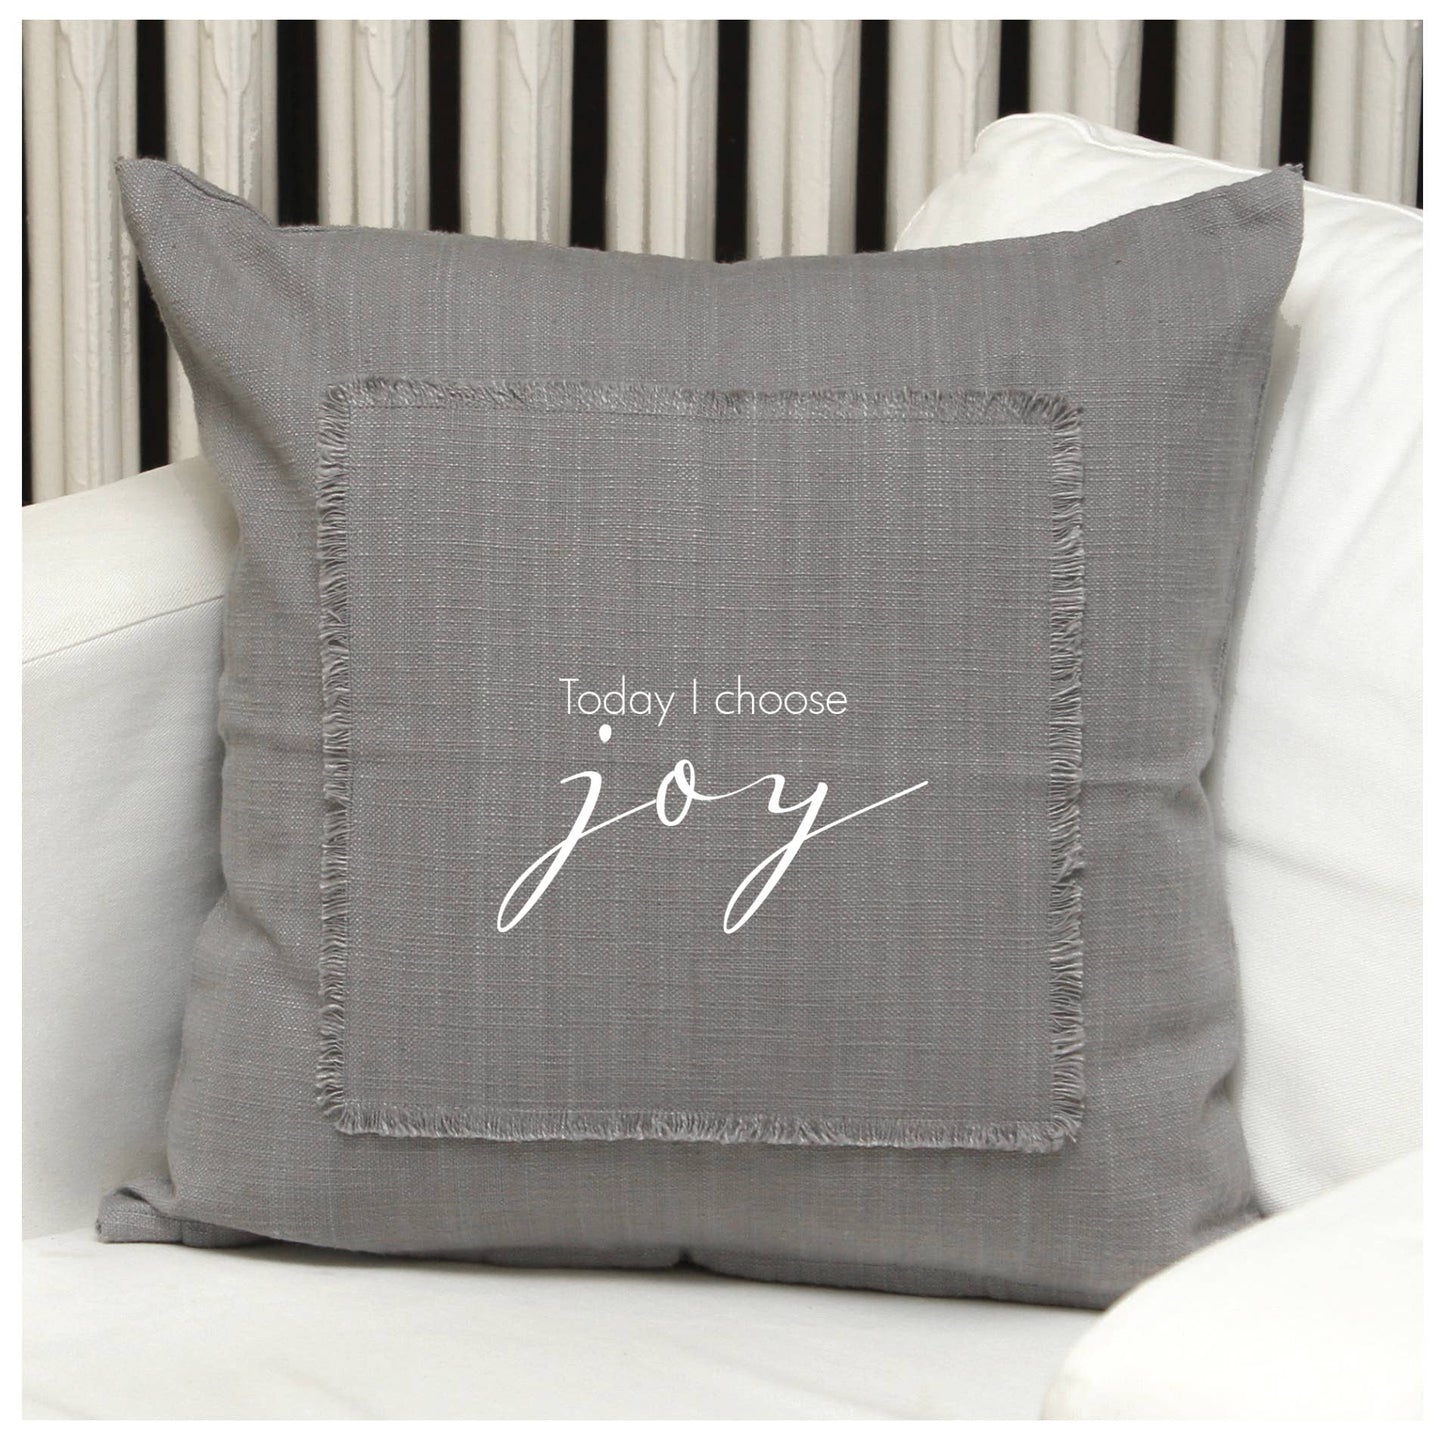 Second Nature by Hand - Today I choose joy- Grey Pillow